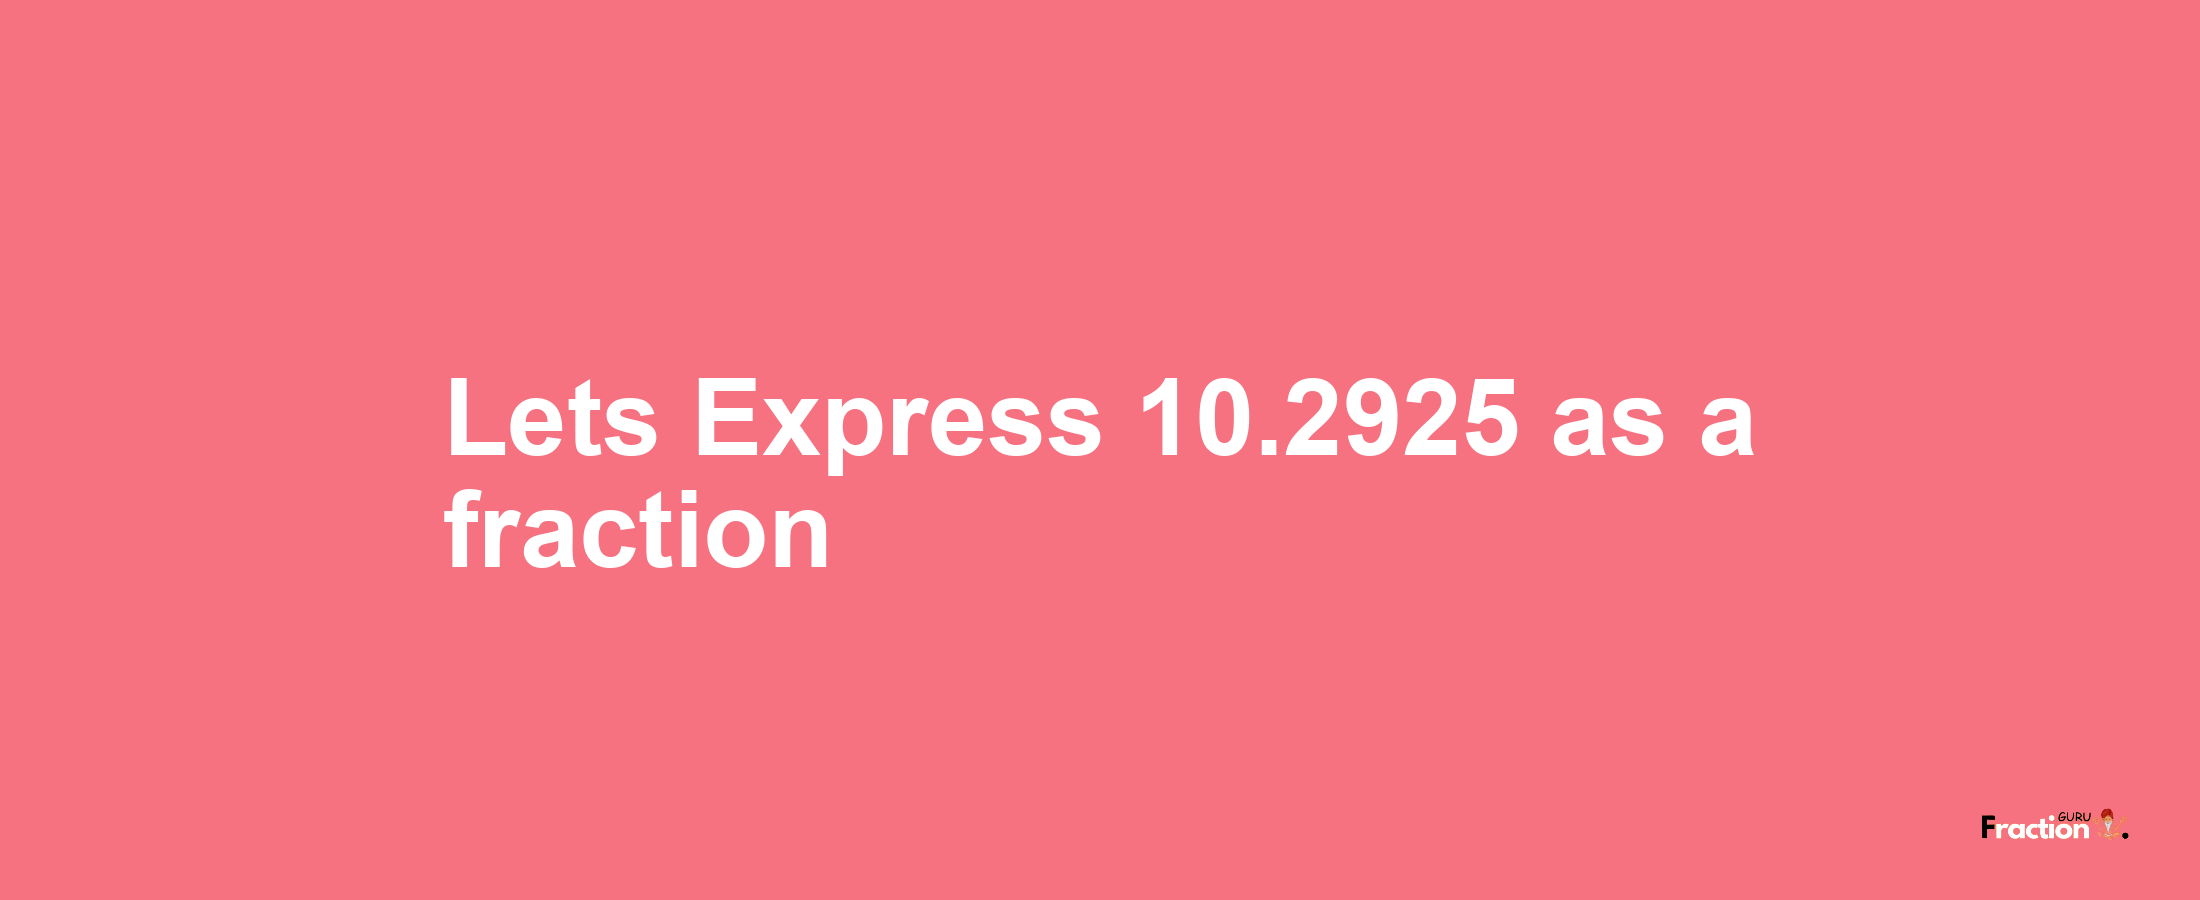 Lets Express 10.2925 as afraction